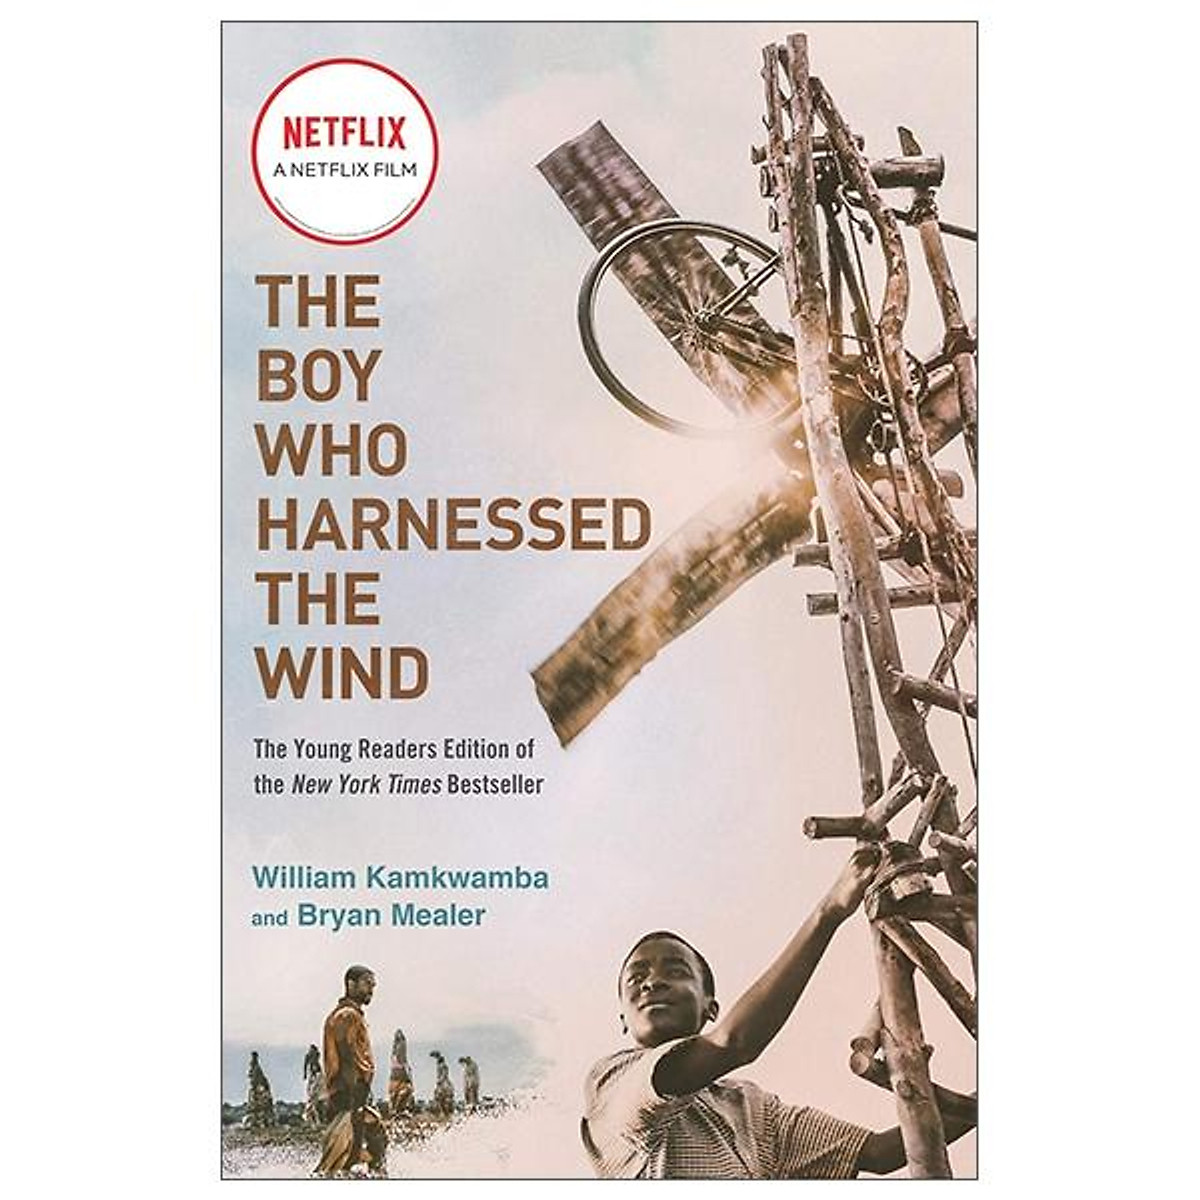 The Boy Who Harnessed The Wind (Movie Tie-in Edition)